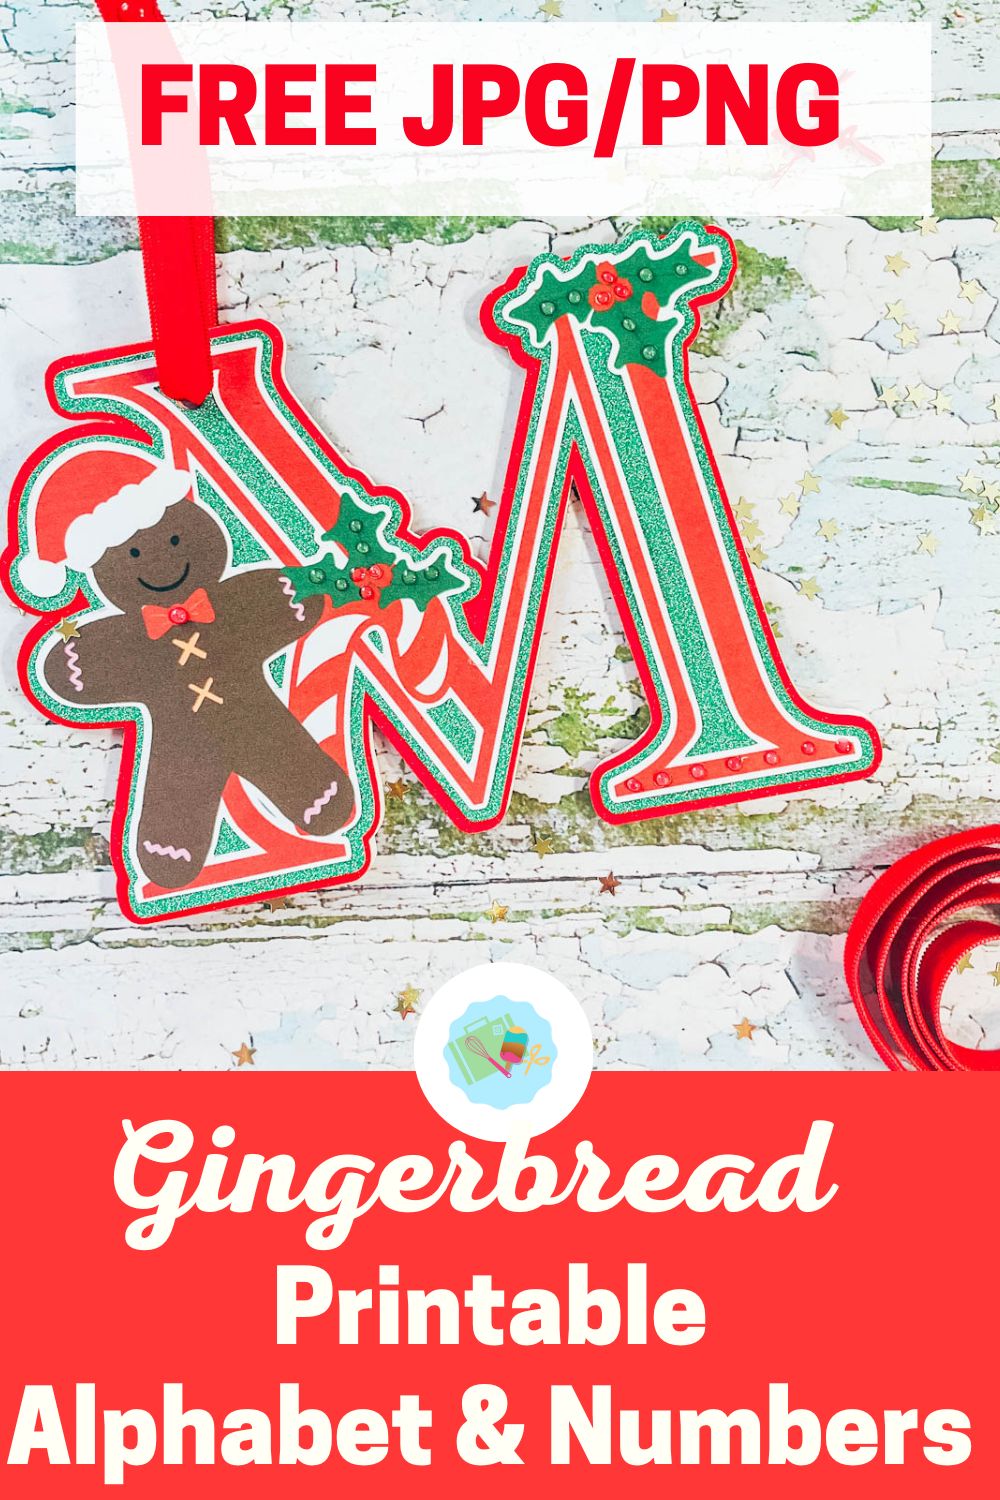 Free printable gingerbread alphabet letters and numbers